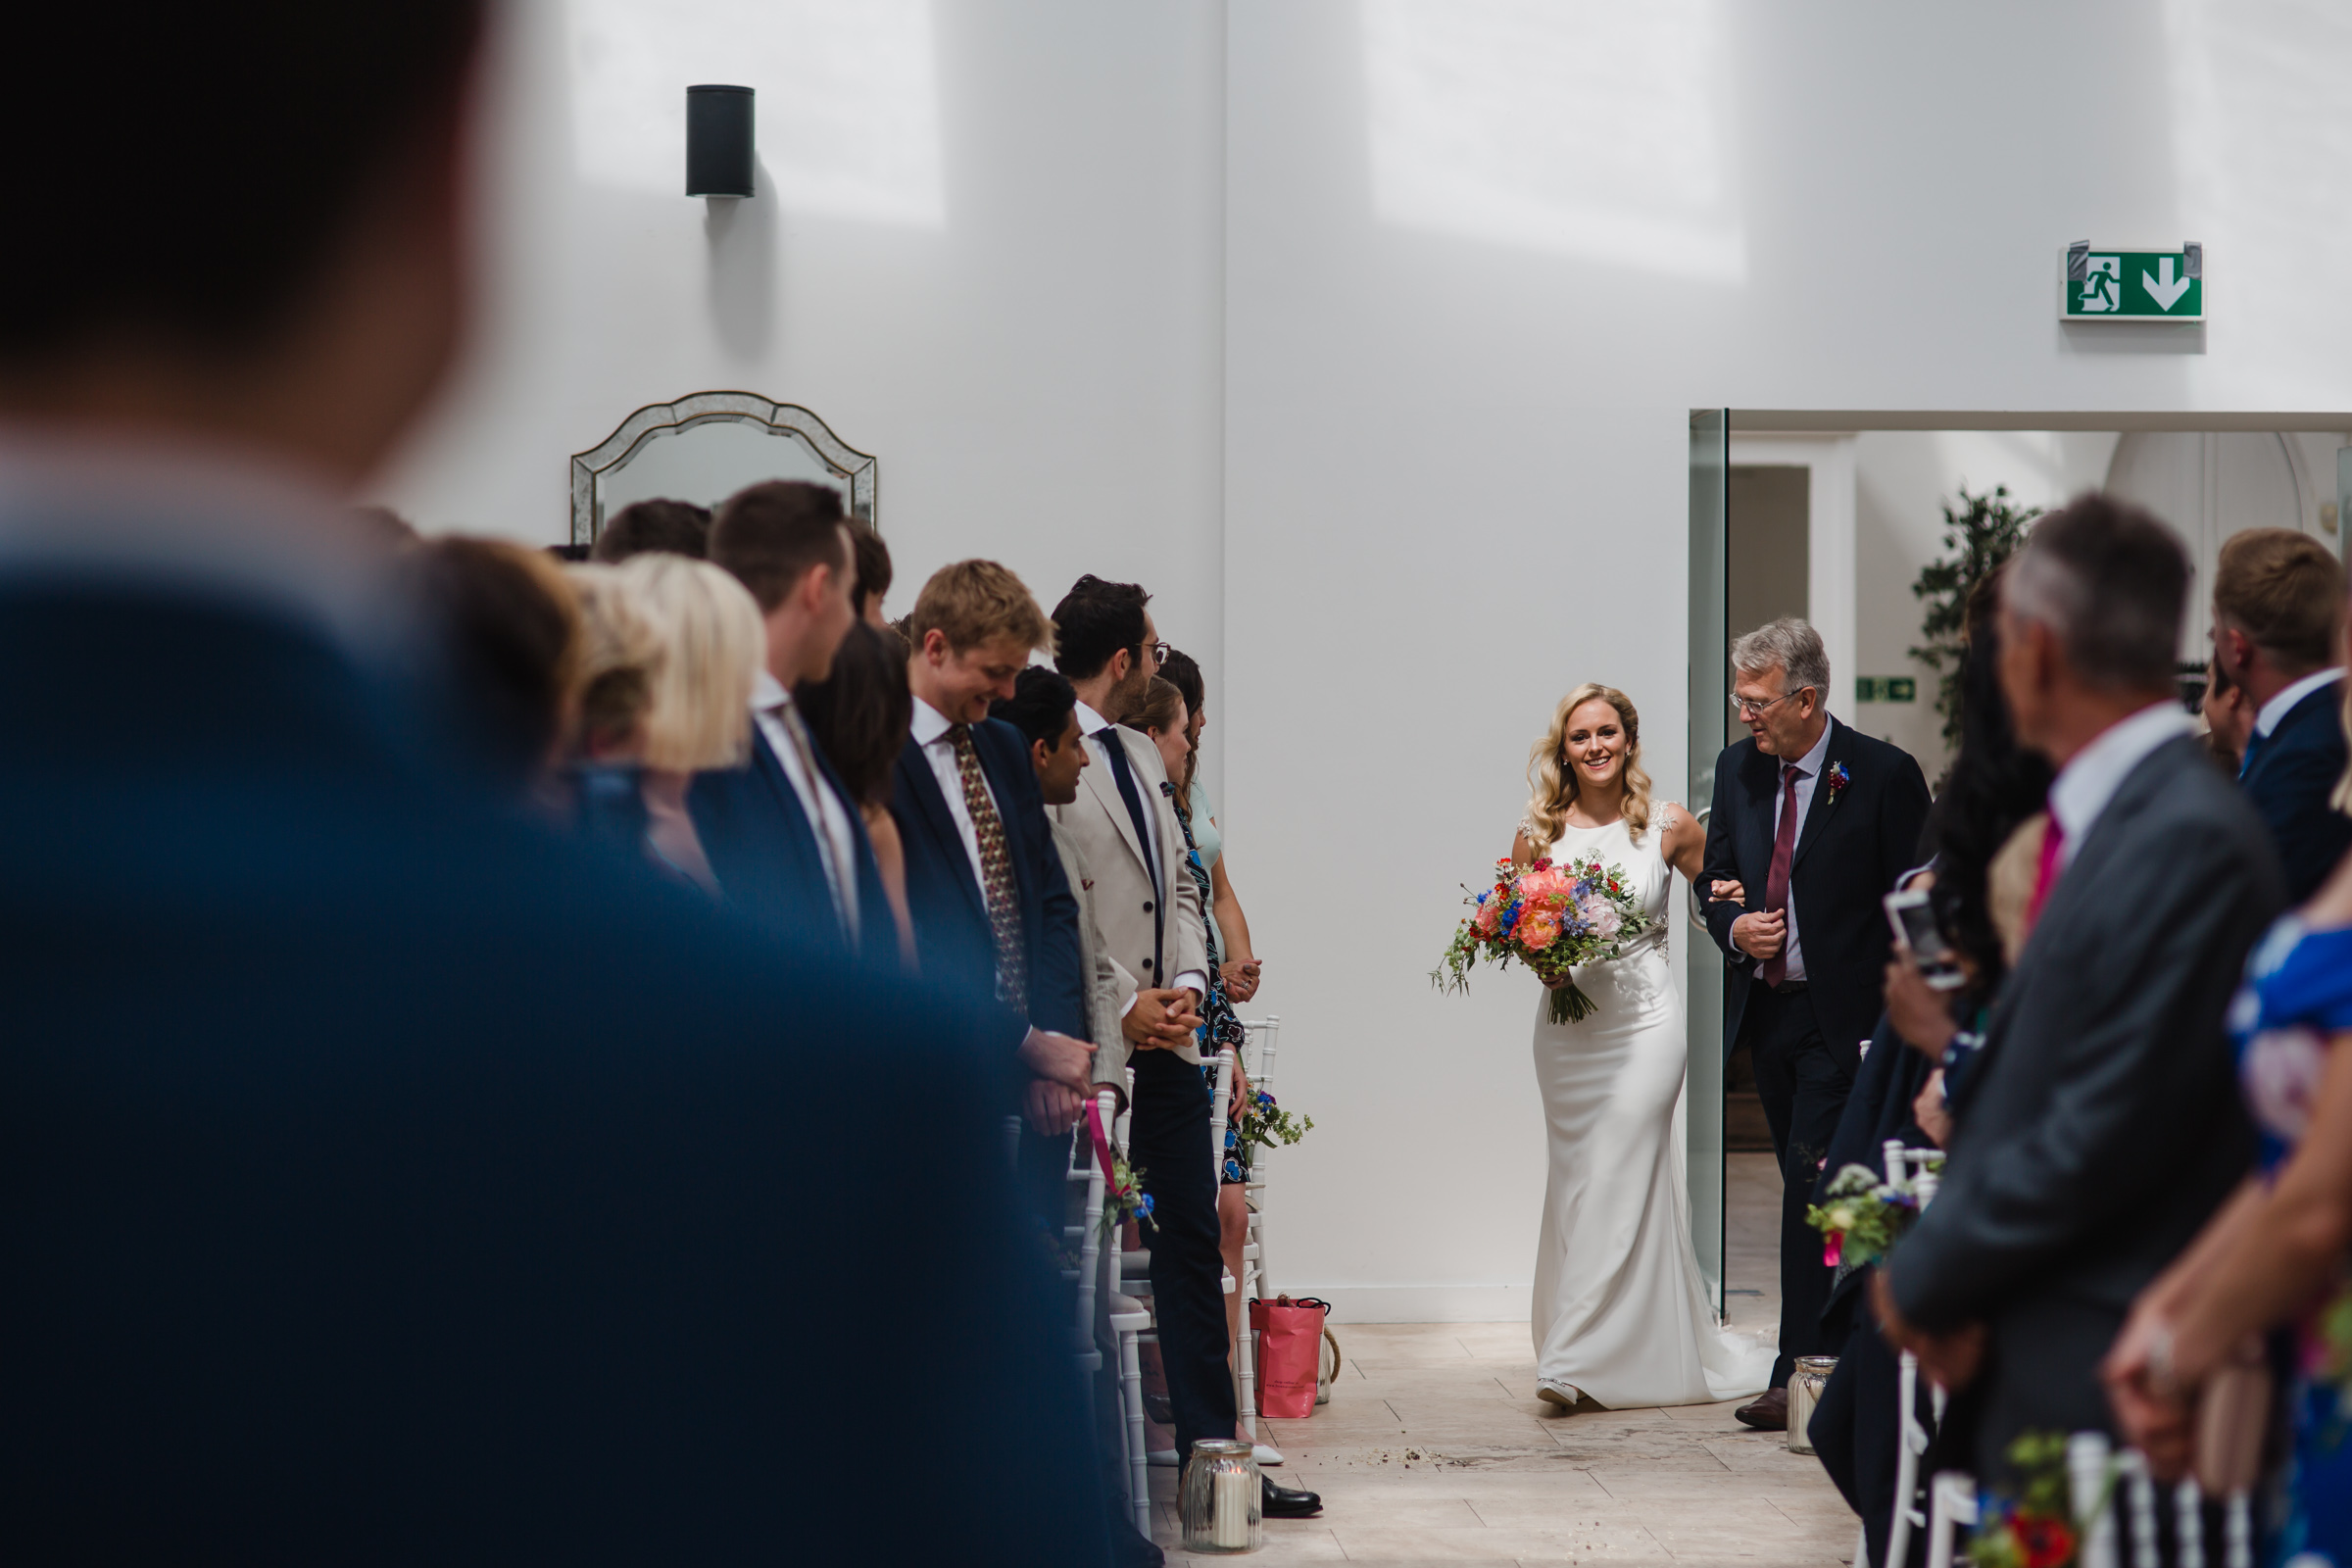 The groom sees the bride for the first time at fazeley studios